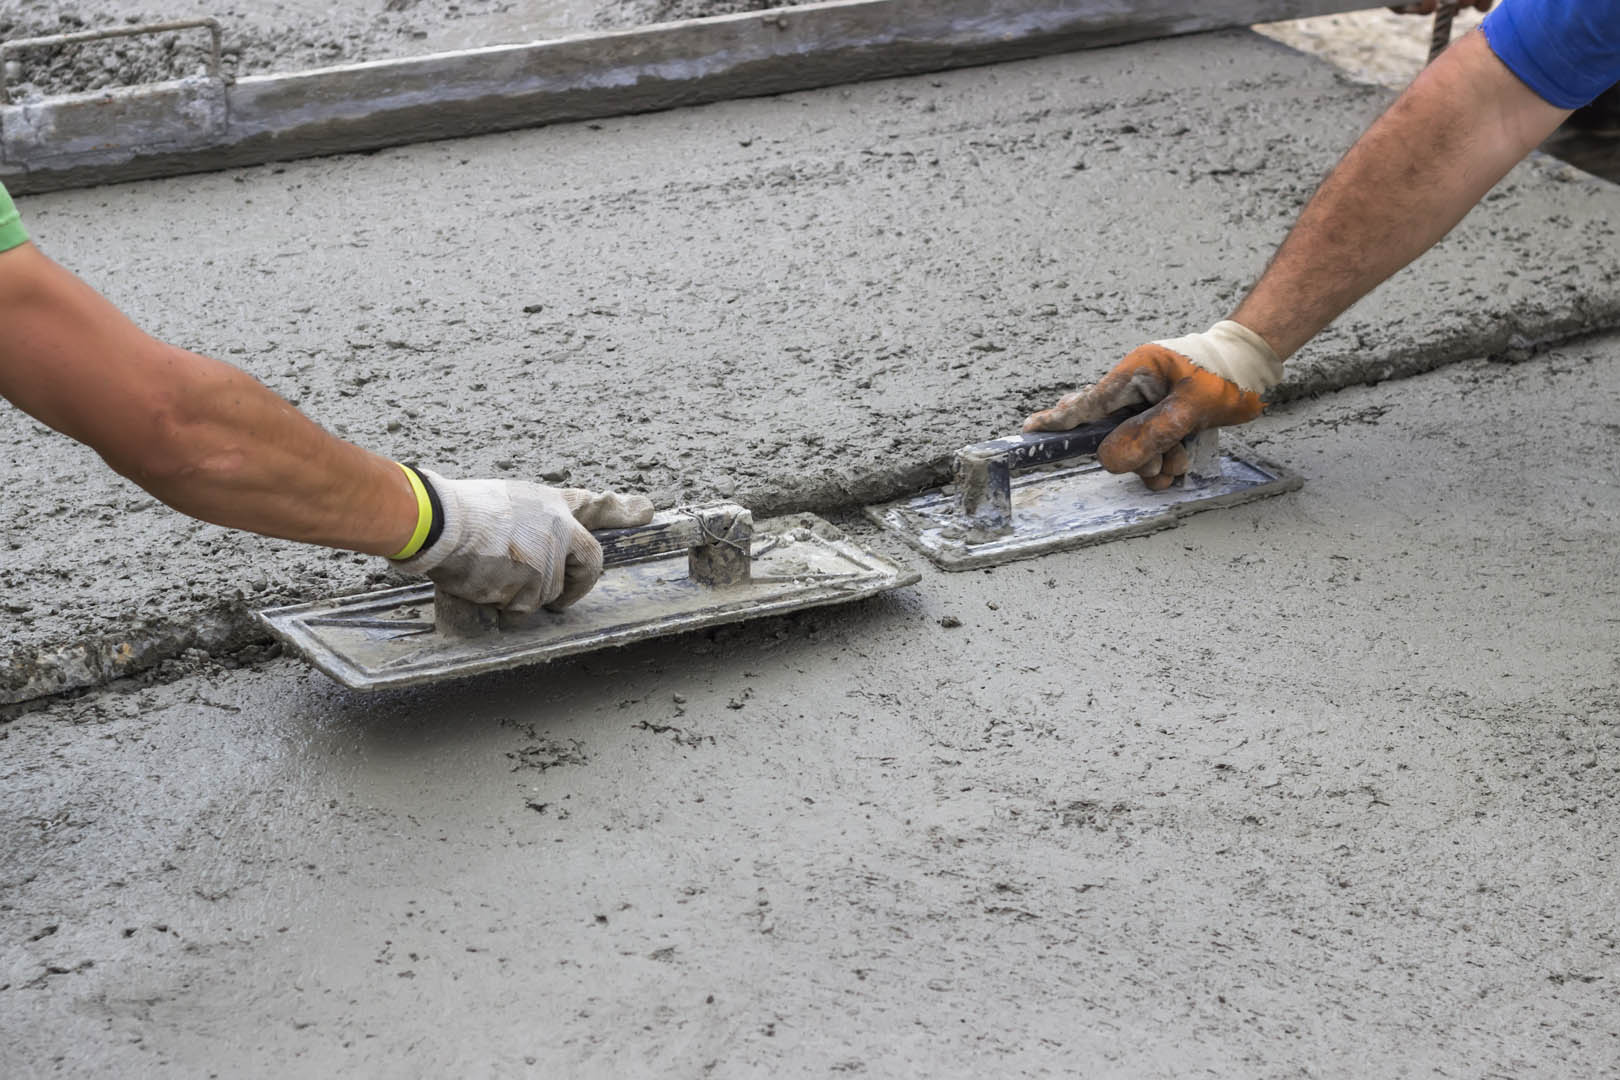 A person is using cement to make concrete.